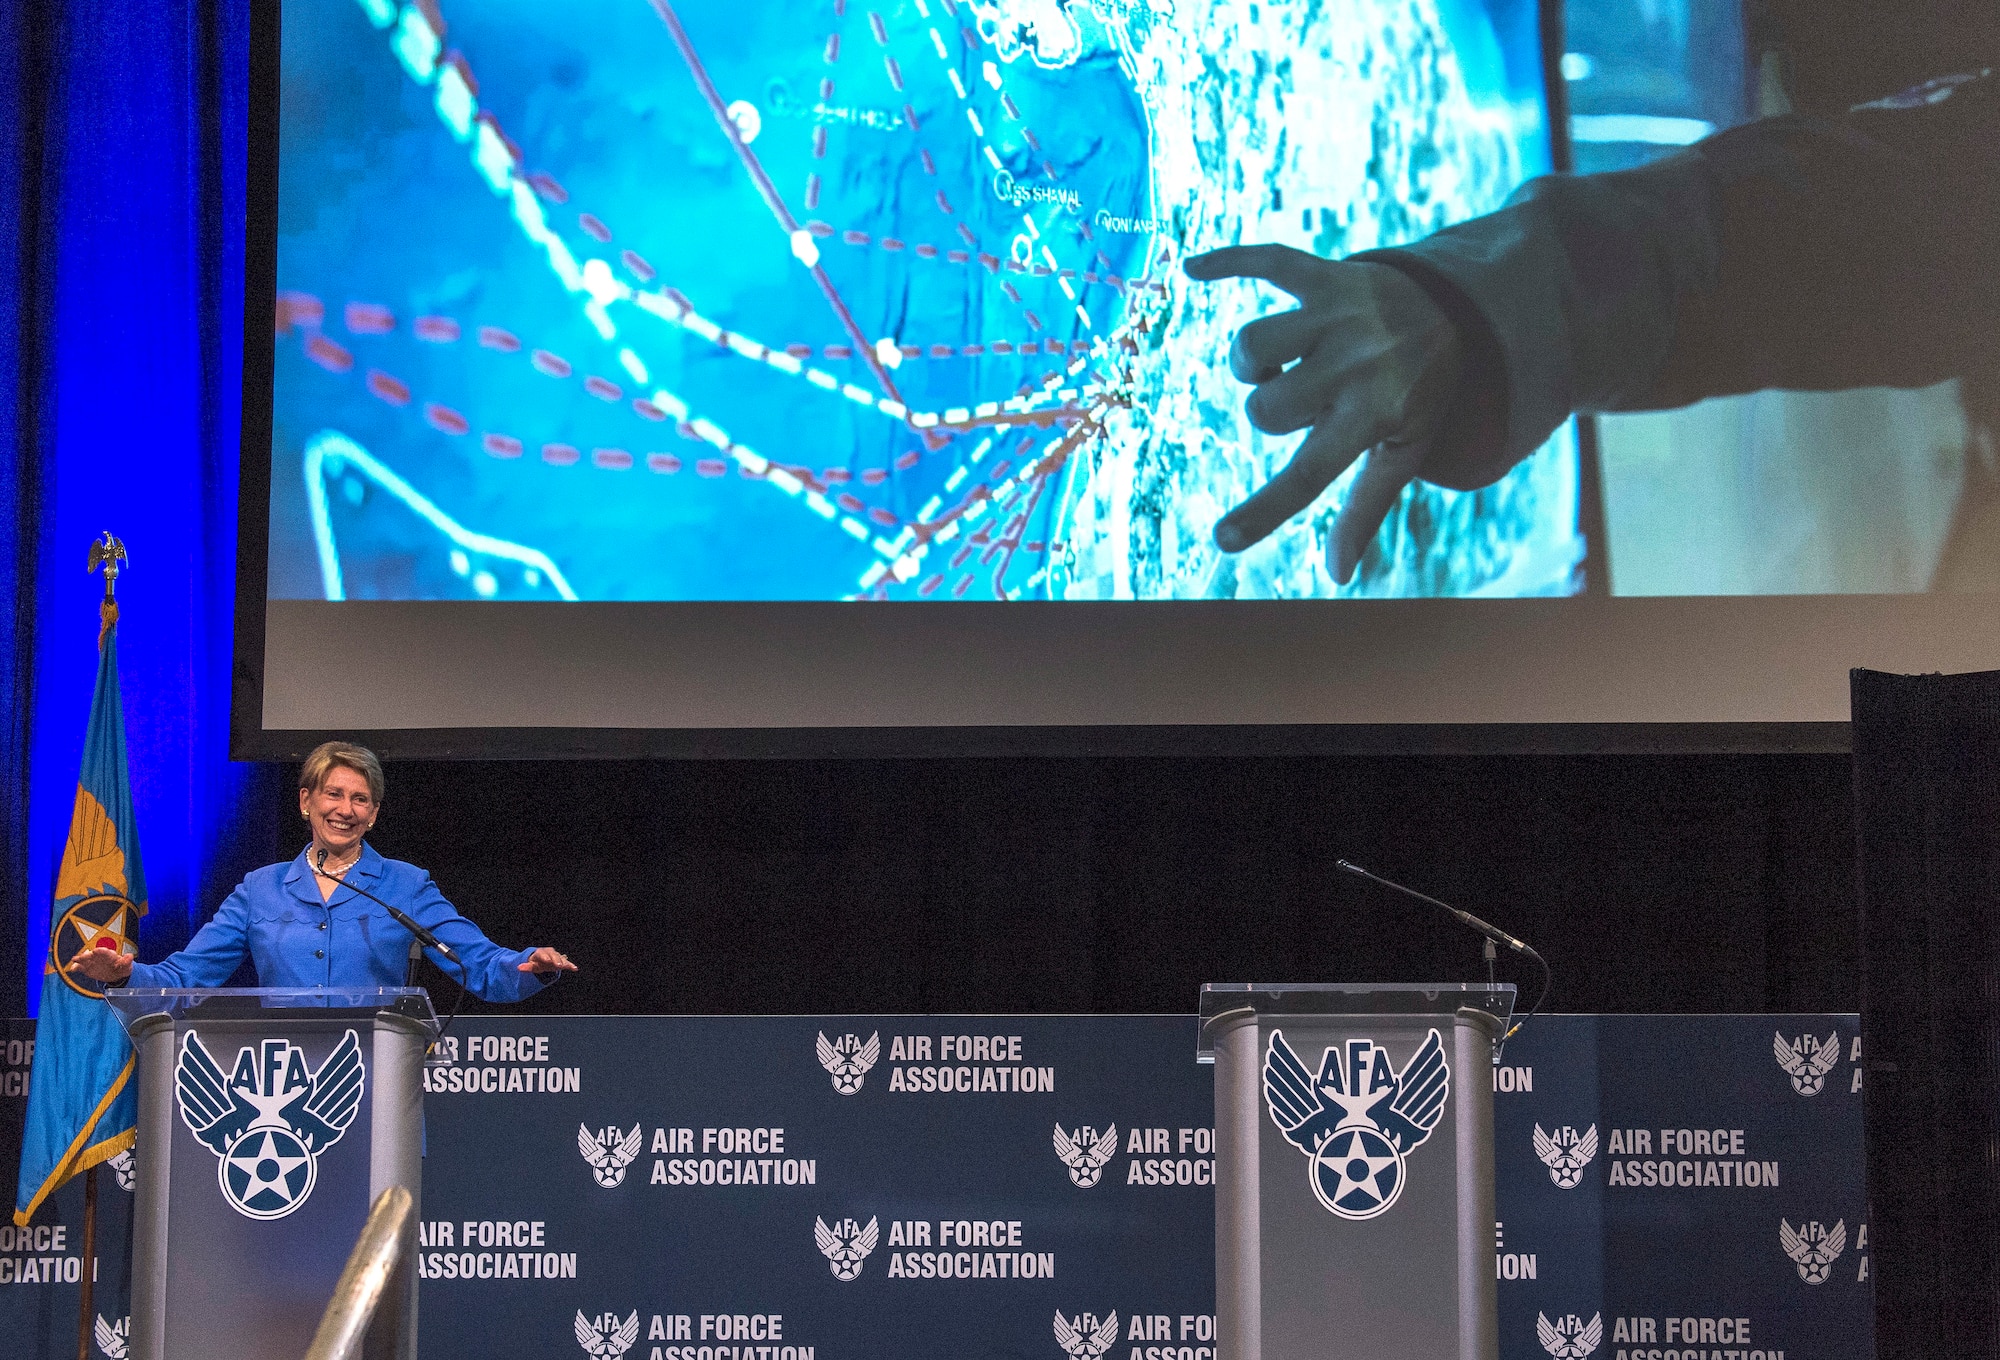 SECAF delivers remarks during the AFA’s Air Warfare Symposium